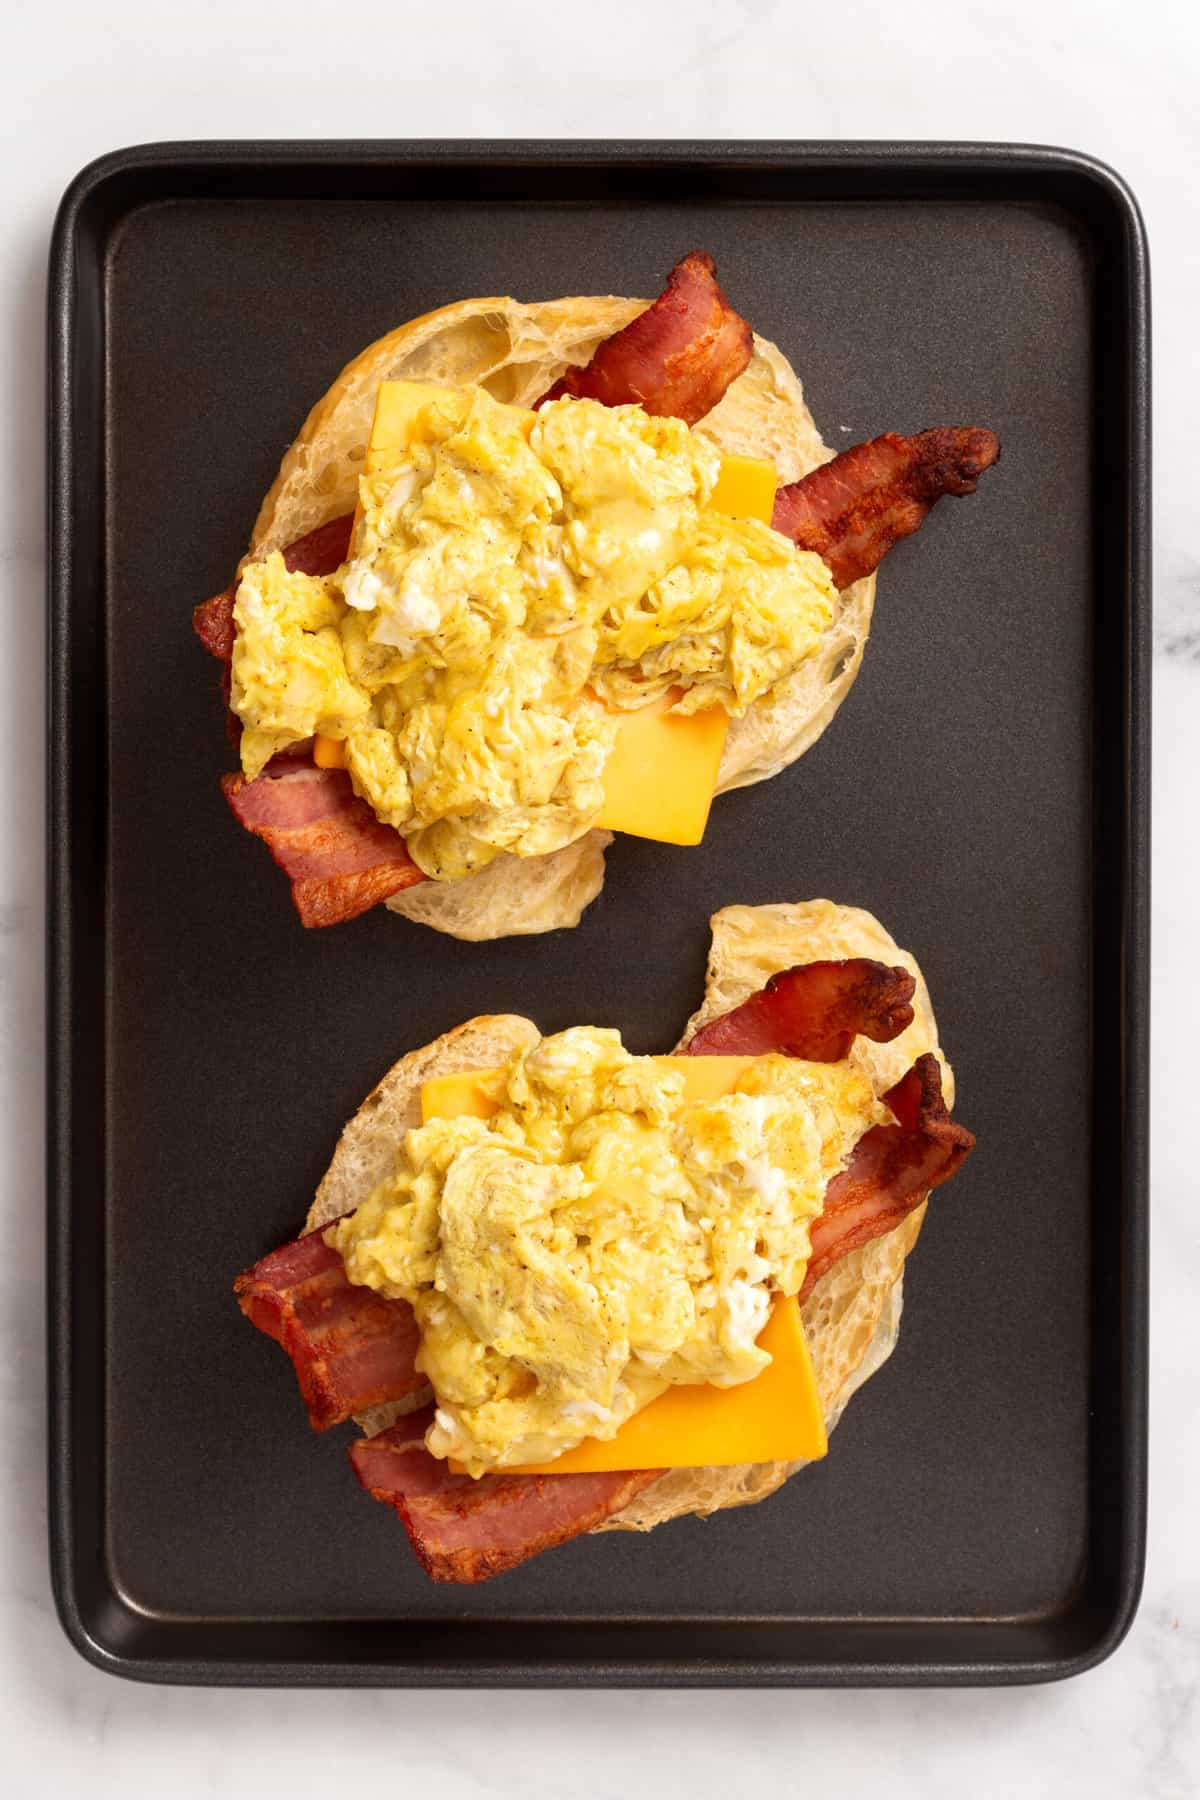 Top down image of a croissant, cut in half layered with two slices of bacon on each croissant half, a slice of cheddar cheese and scrambled, eggs on each half sitting on a baking tray.